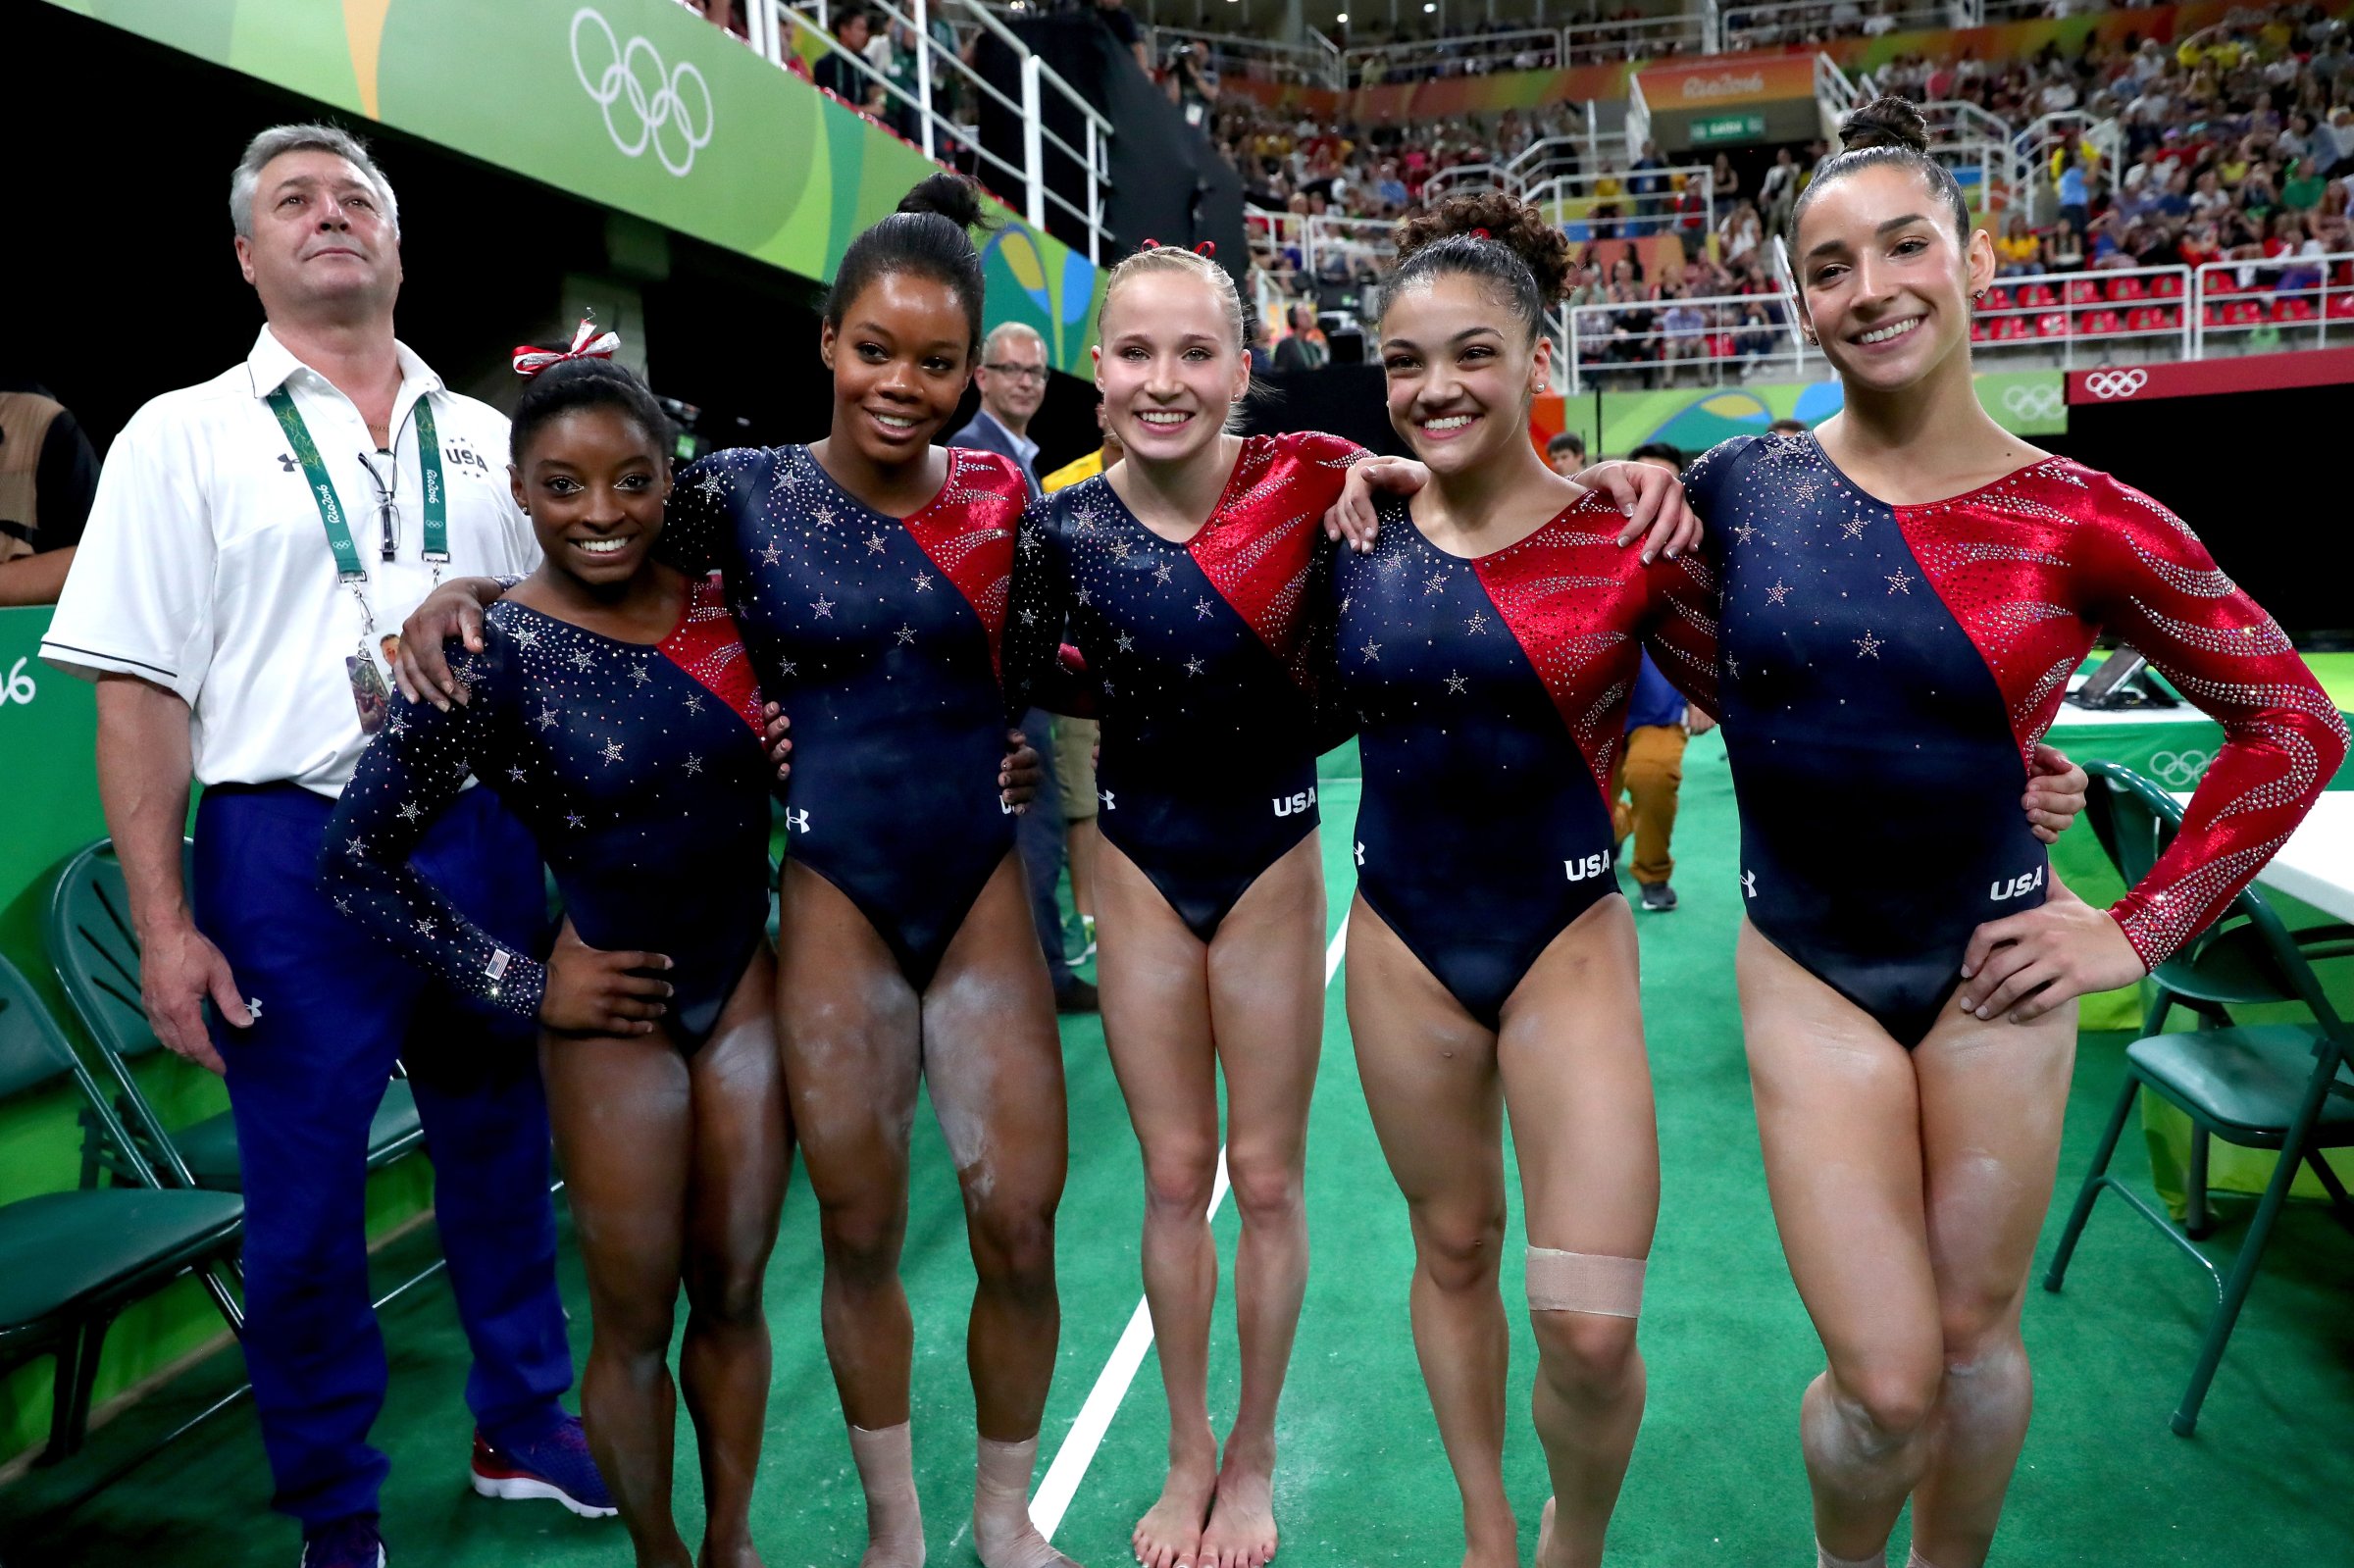 (L to R) Coach Mihai Brestyan, Simone Biles, Gabrielle Douglas, Madison Kocian, Lauren Hernandez and Alexandra Raisman of the United States pose for photographs after Women's qualification for Artistic Gymnastics on Day 2 of the Rio 2016 Olympic Games at the Rio Olympic Arena Rio de Janeiro on Aug. 7, 2016.